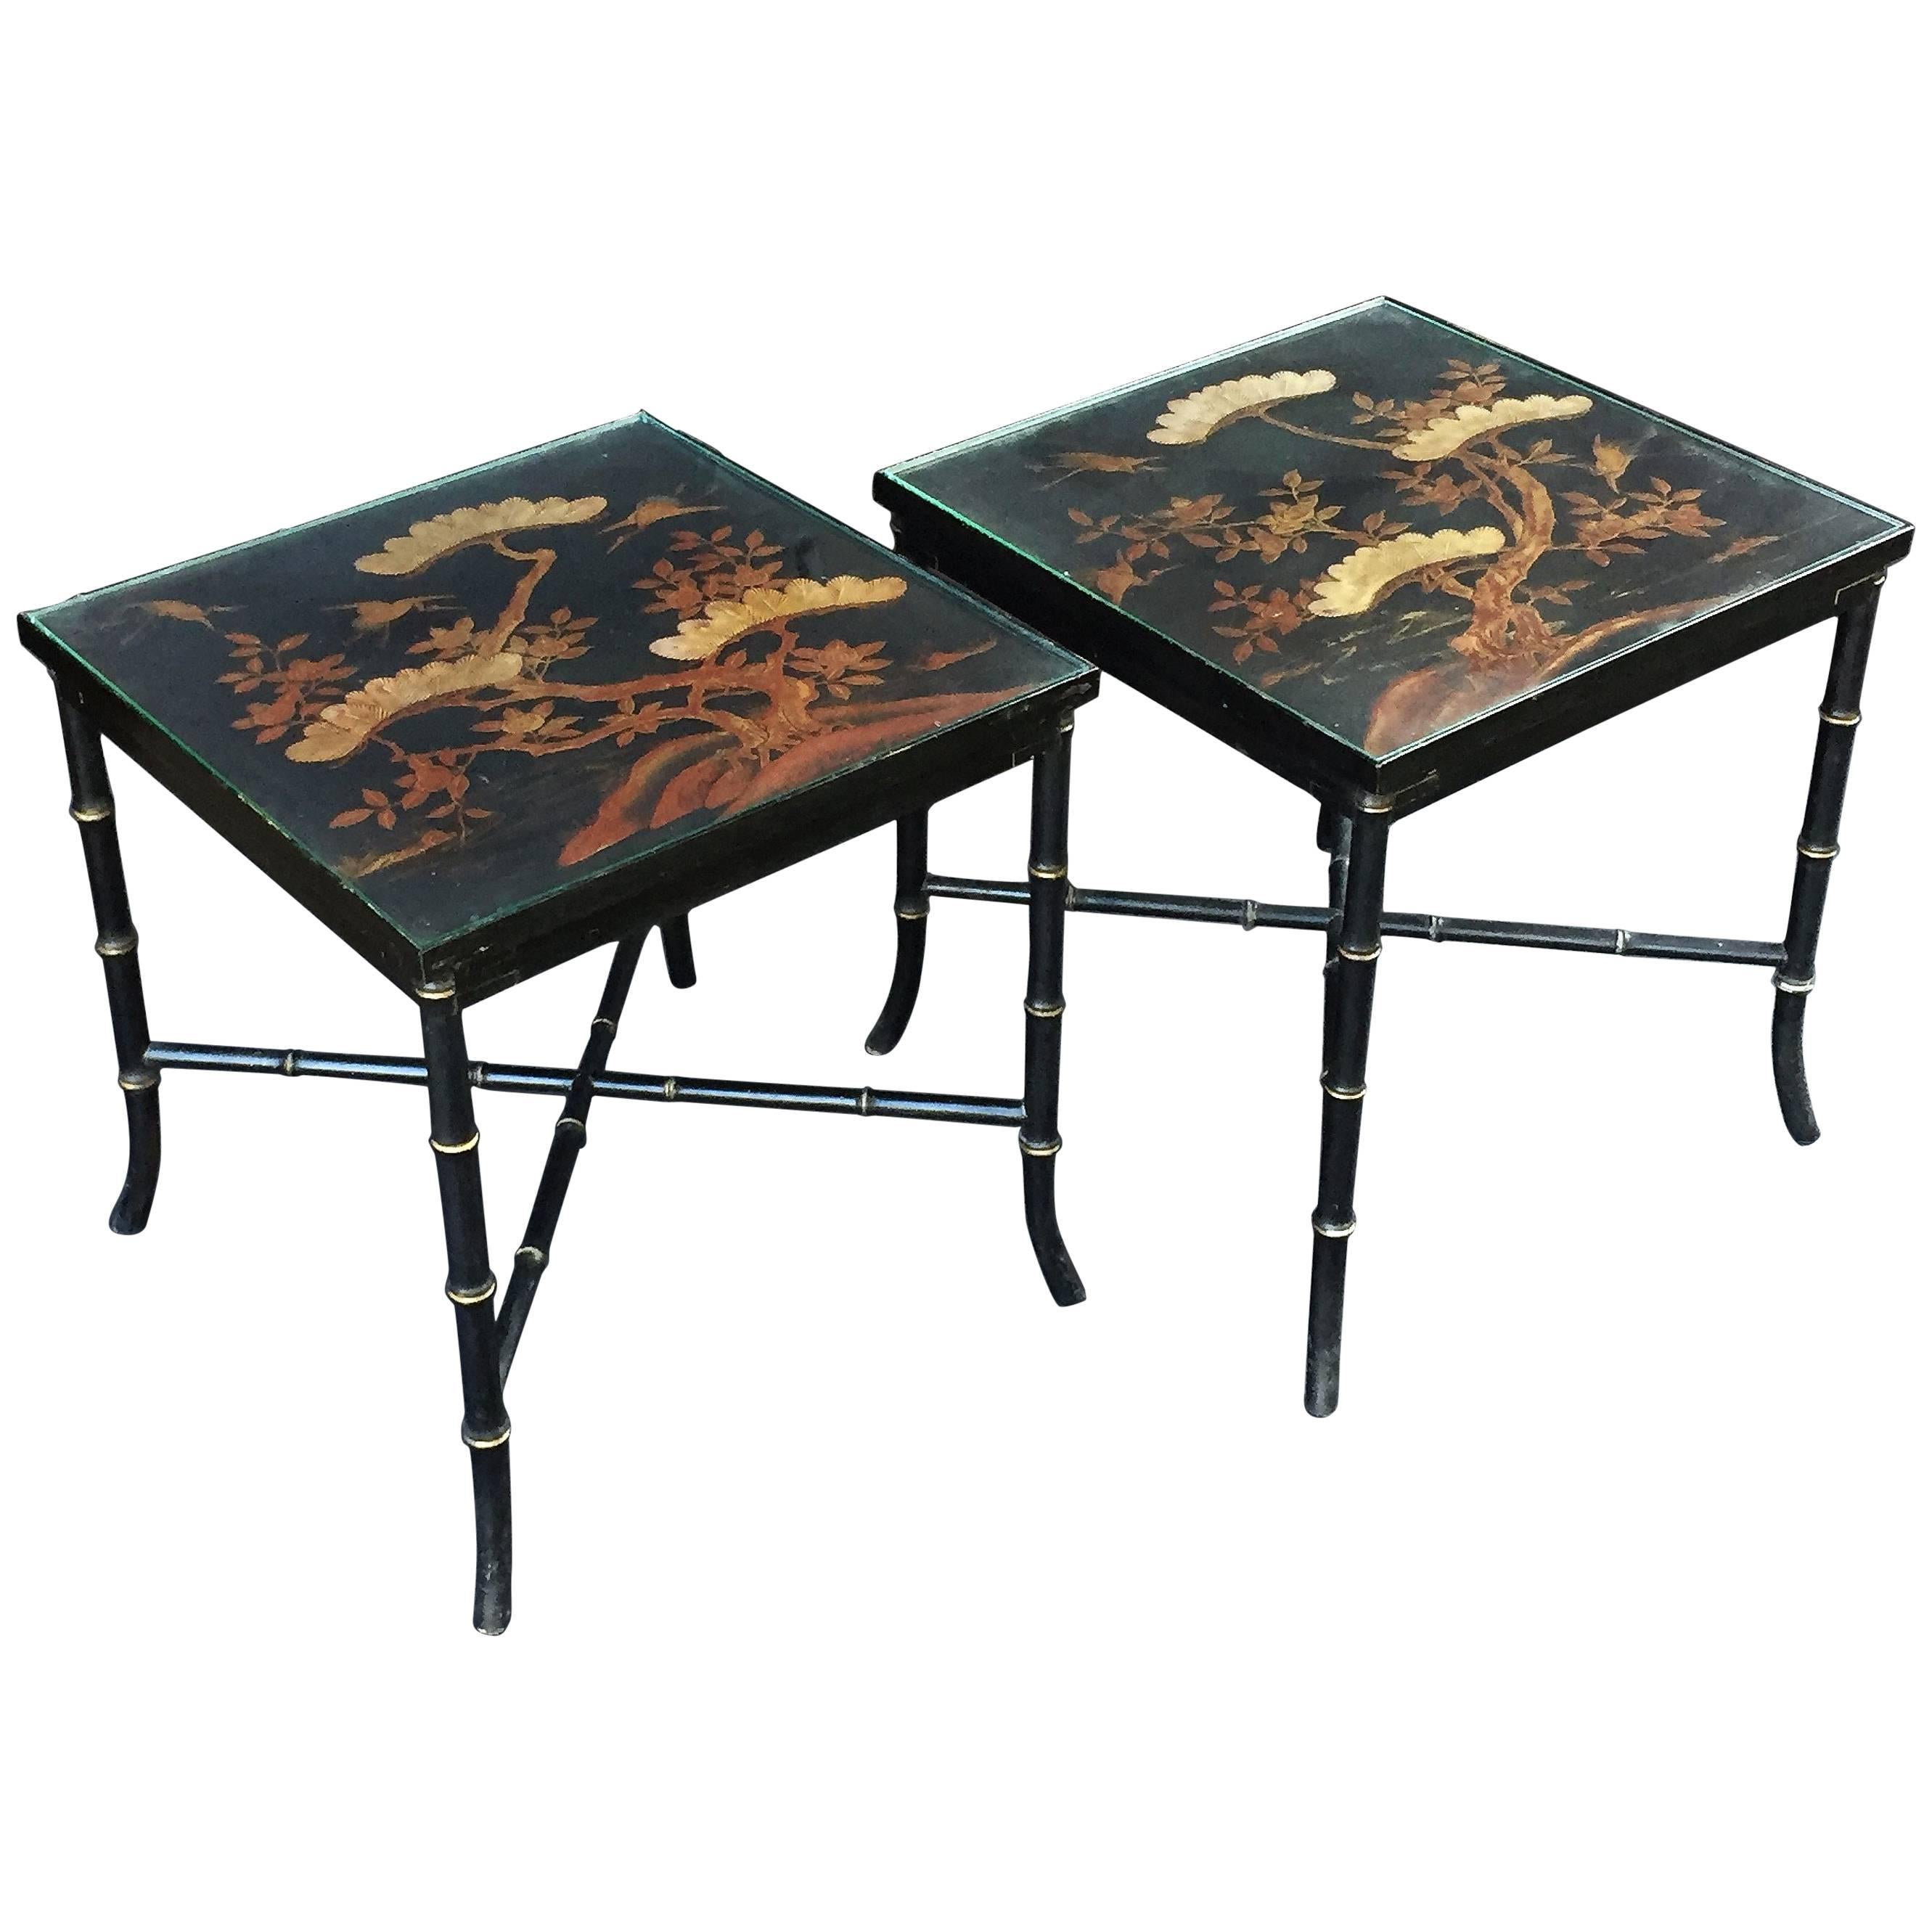 English Low Tables of Japan-Lacquered Bamboo 'Individually Priced'